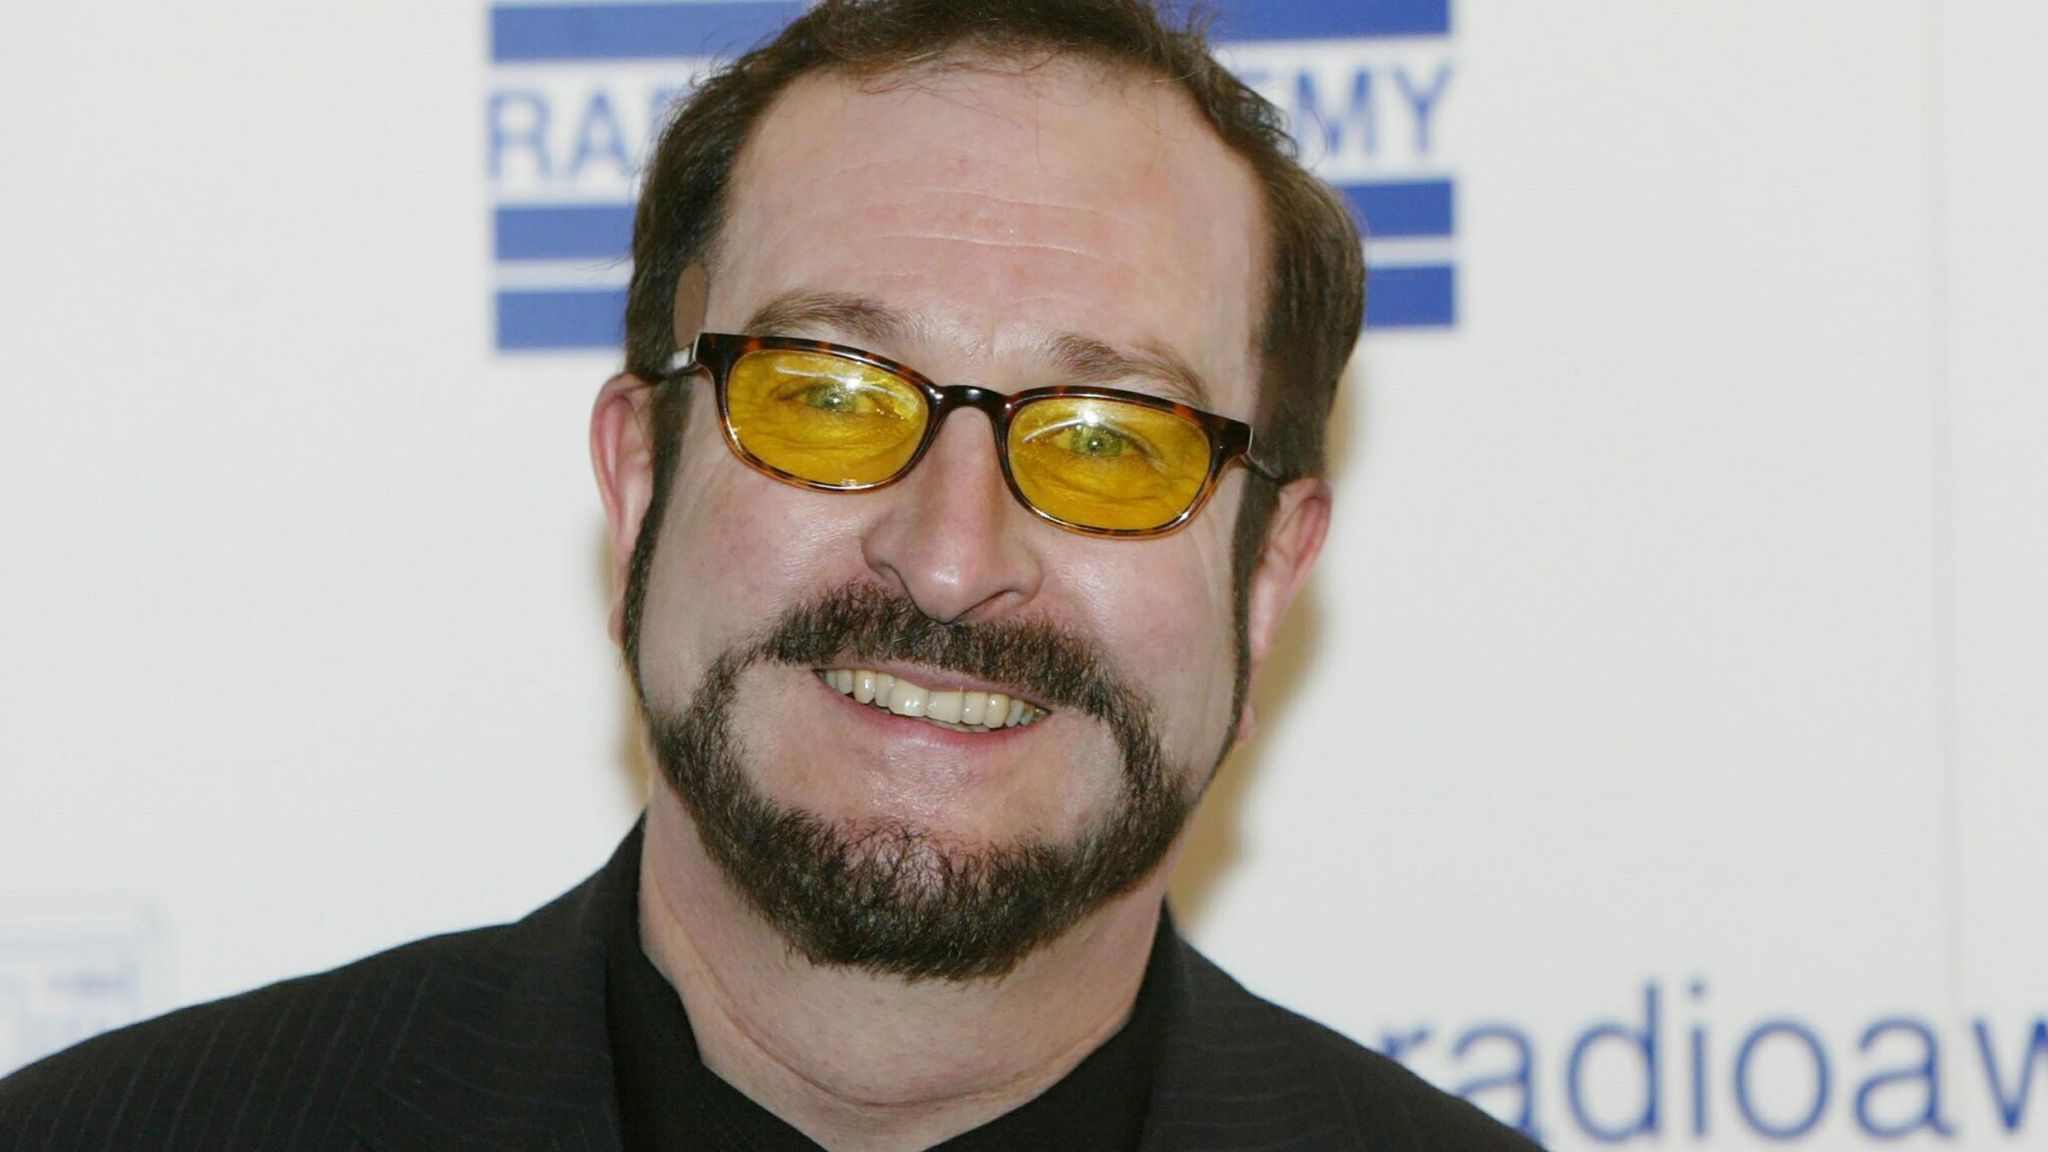 A photo of Steve Wright